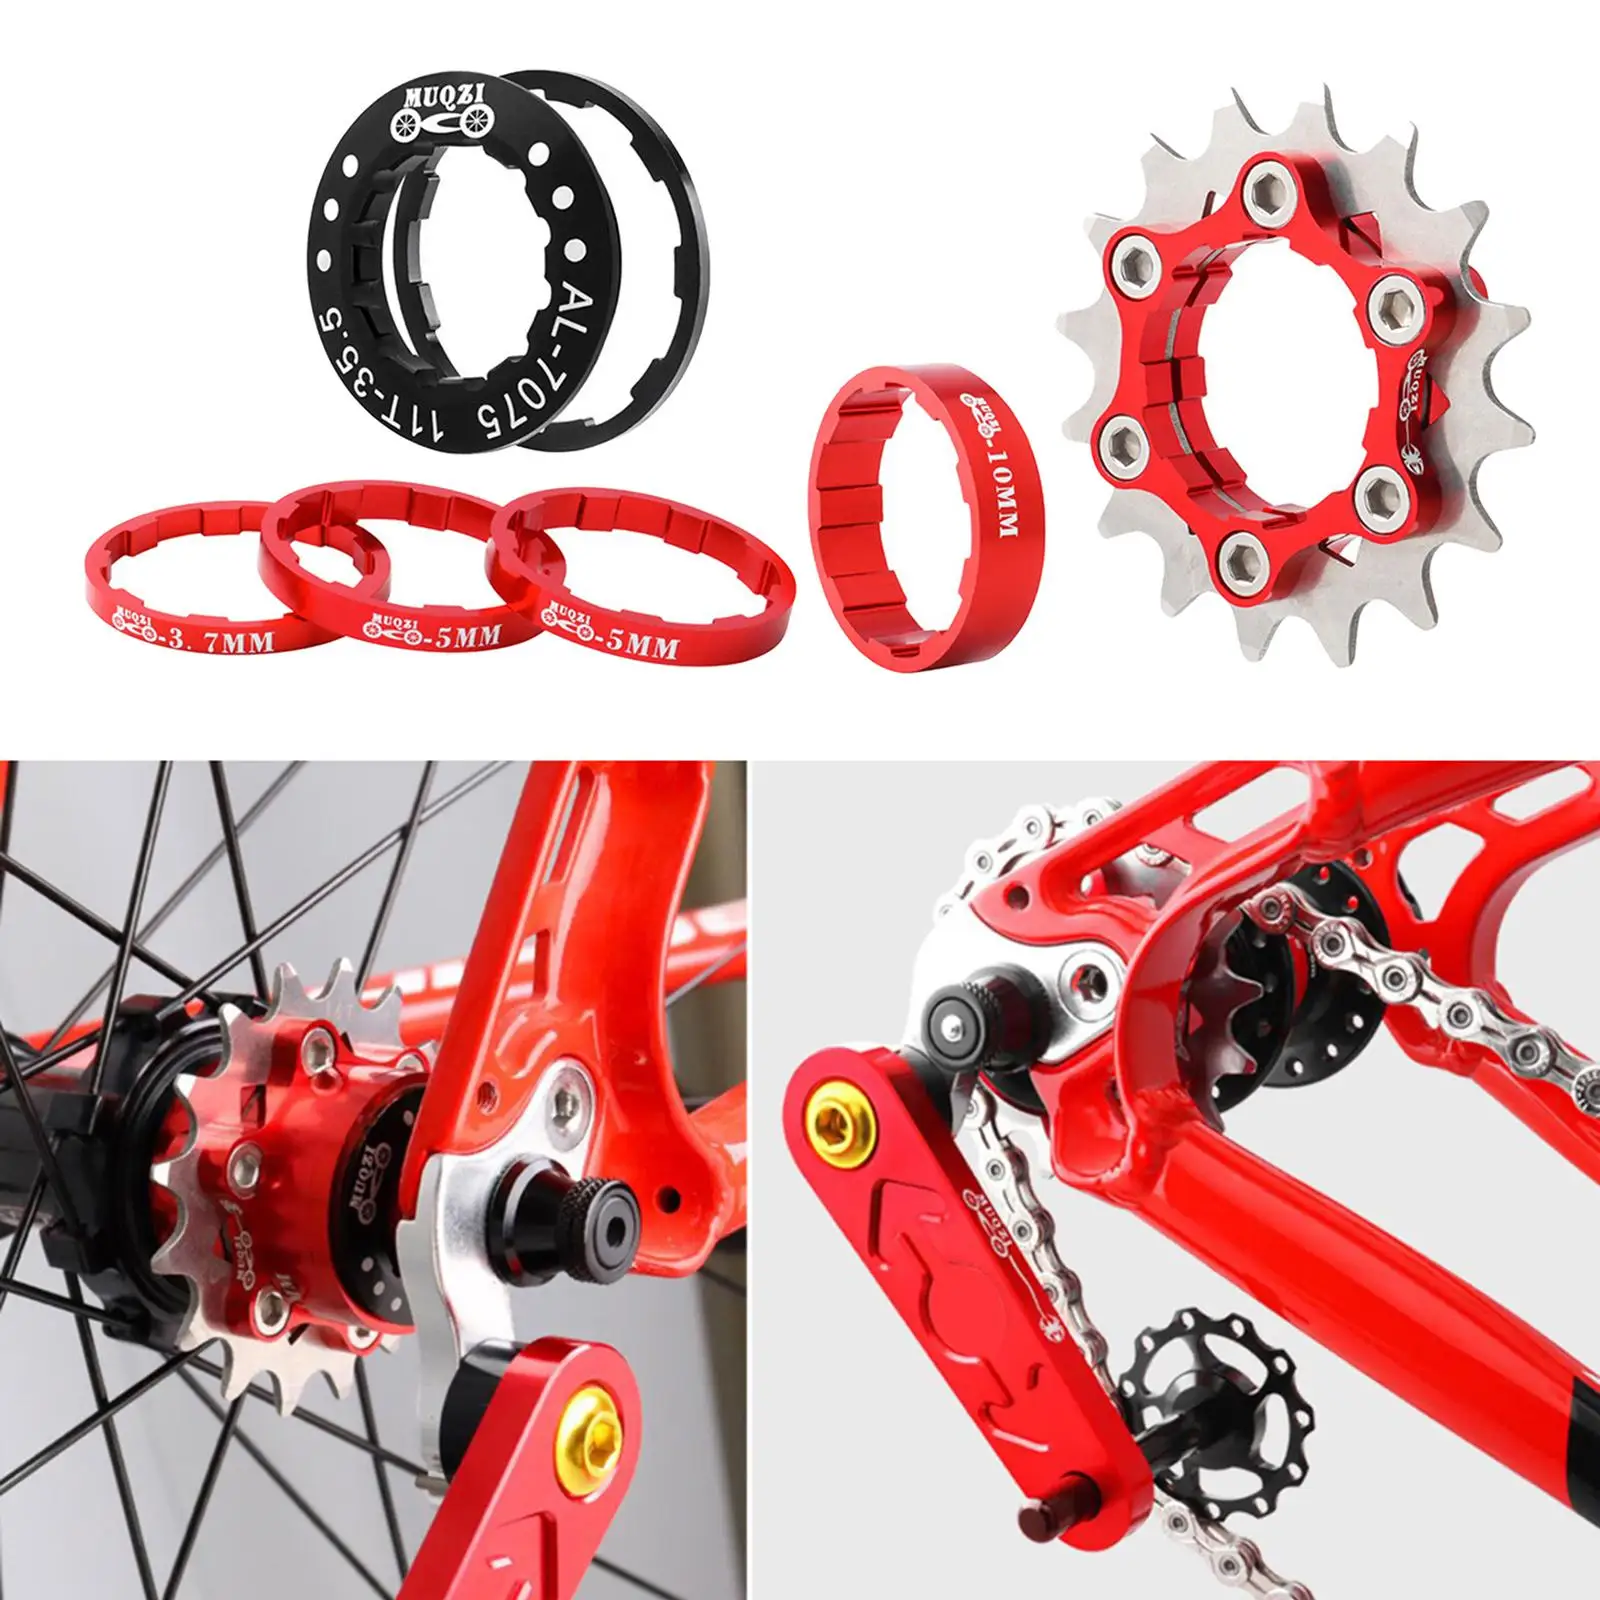  16T Cassette Single Cog Set High Strength Steel Removeable  Sprocket Component  Cog Fixed Adapter for MTB BMX